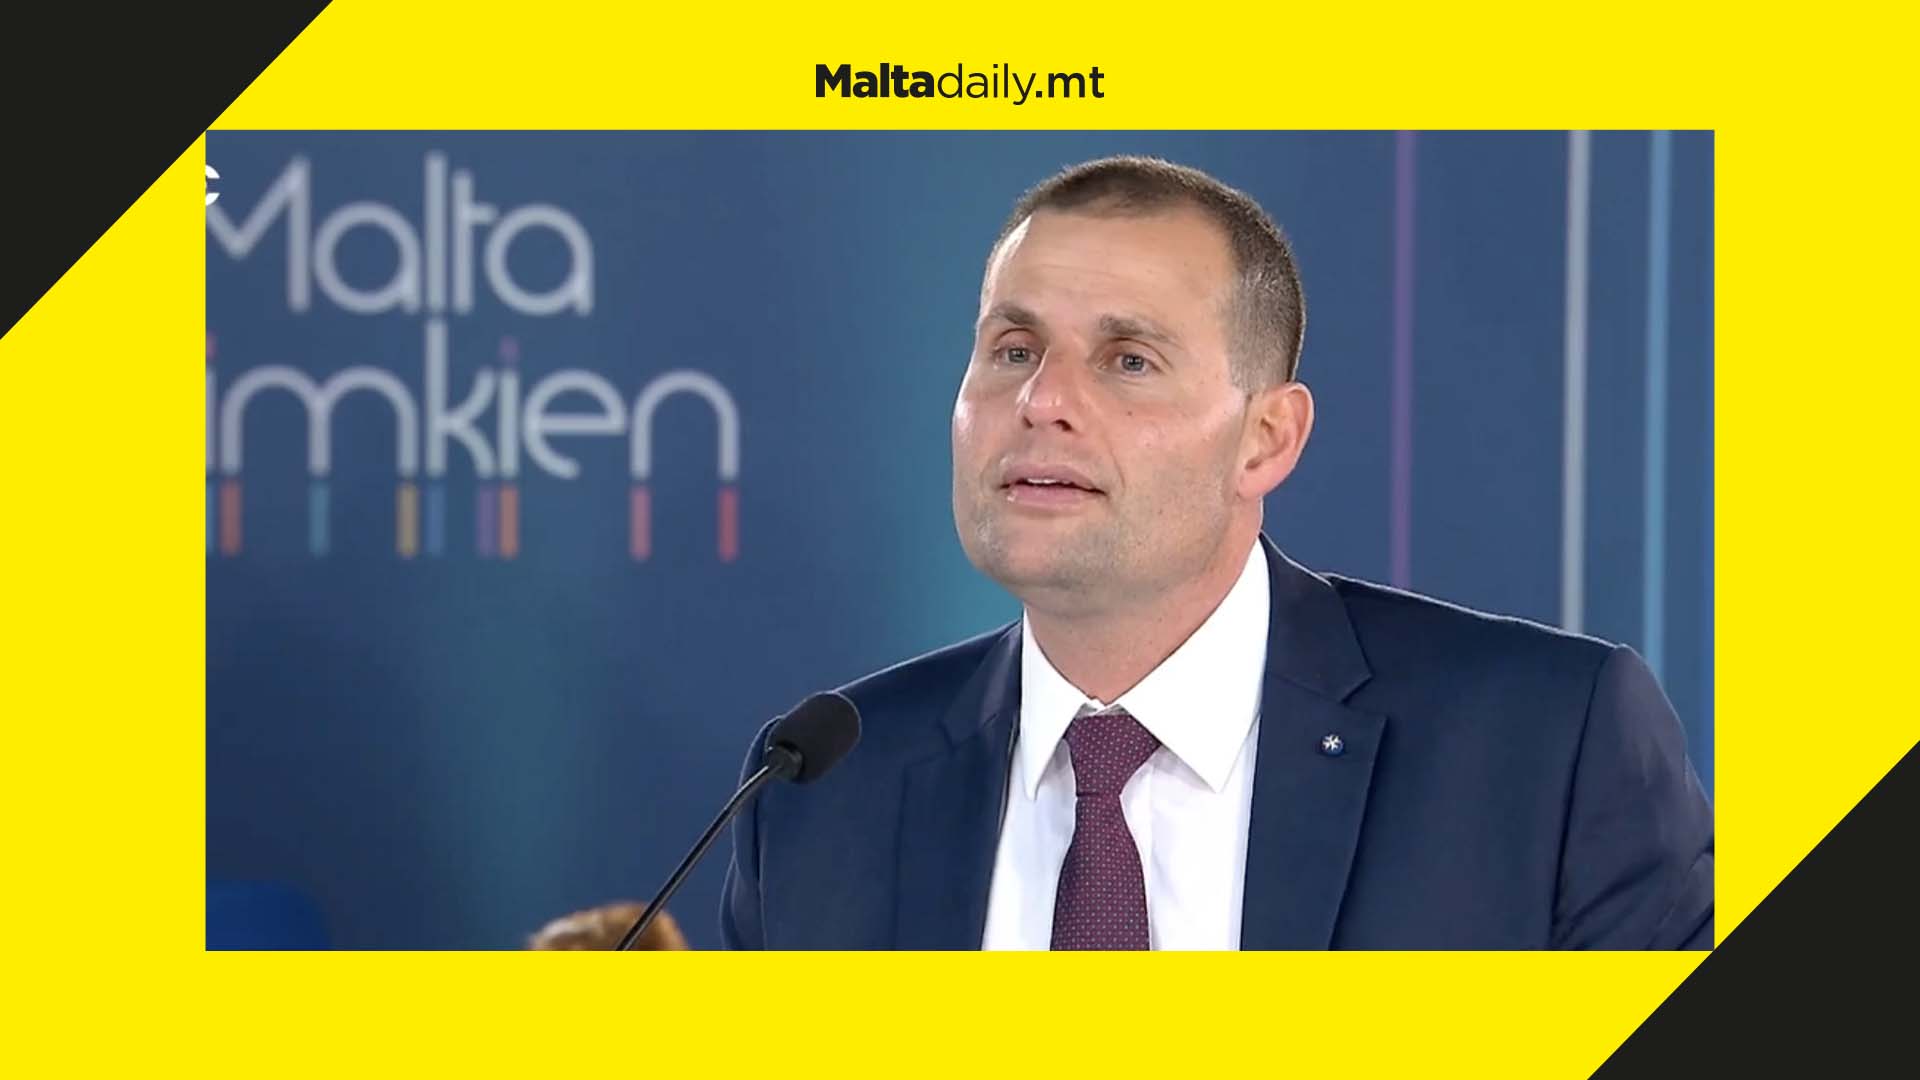 Malta will aid food importers to prevent hiking prices says Abela